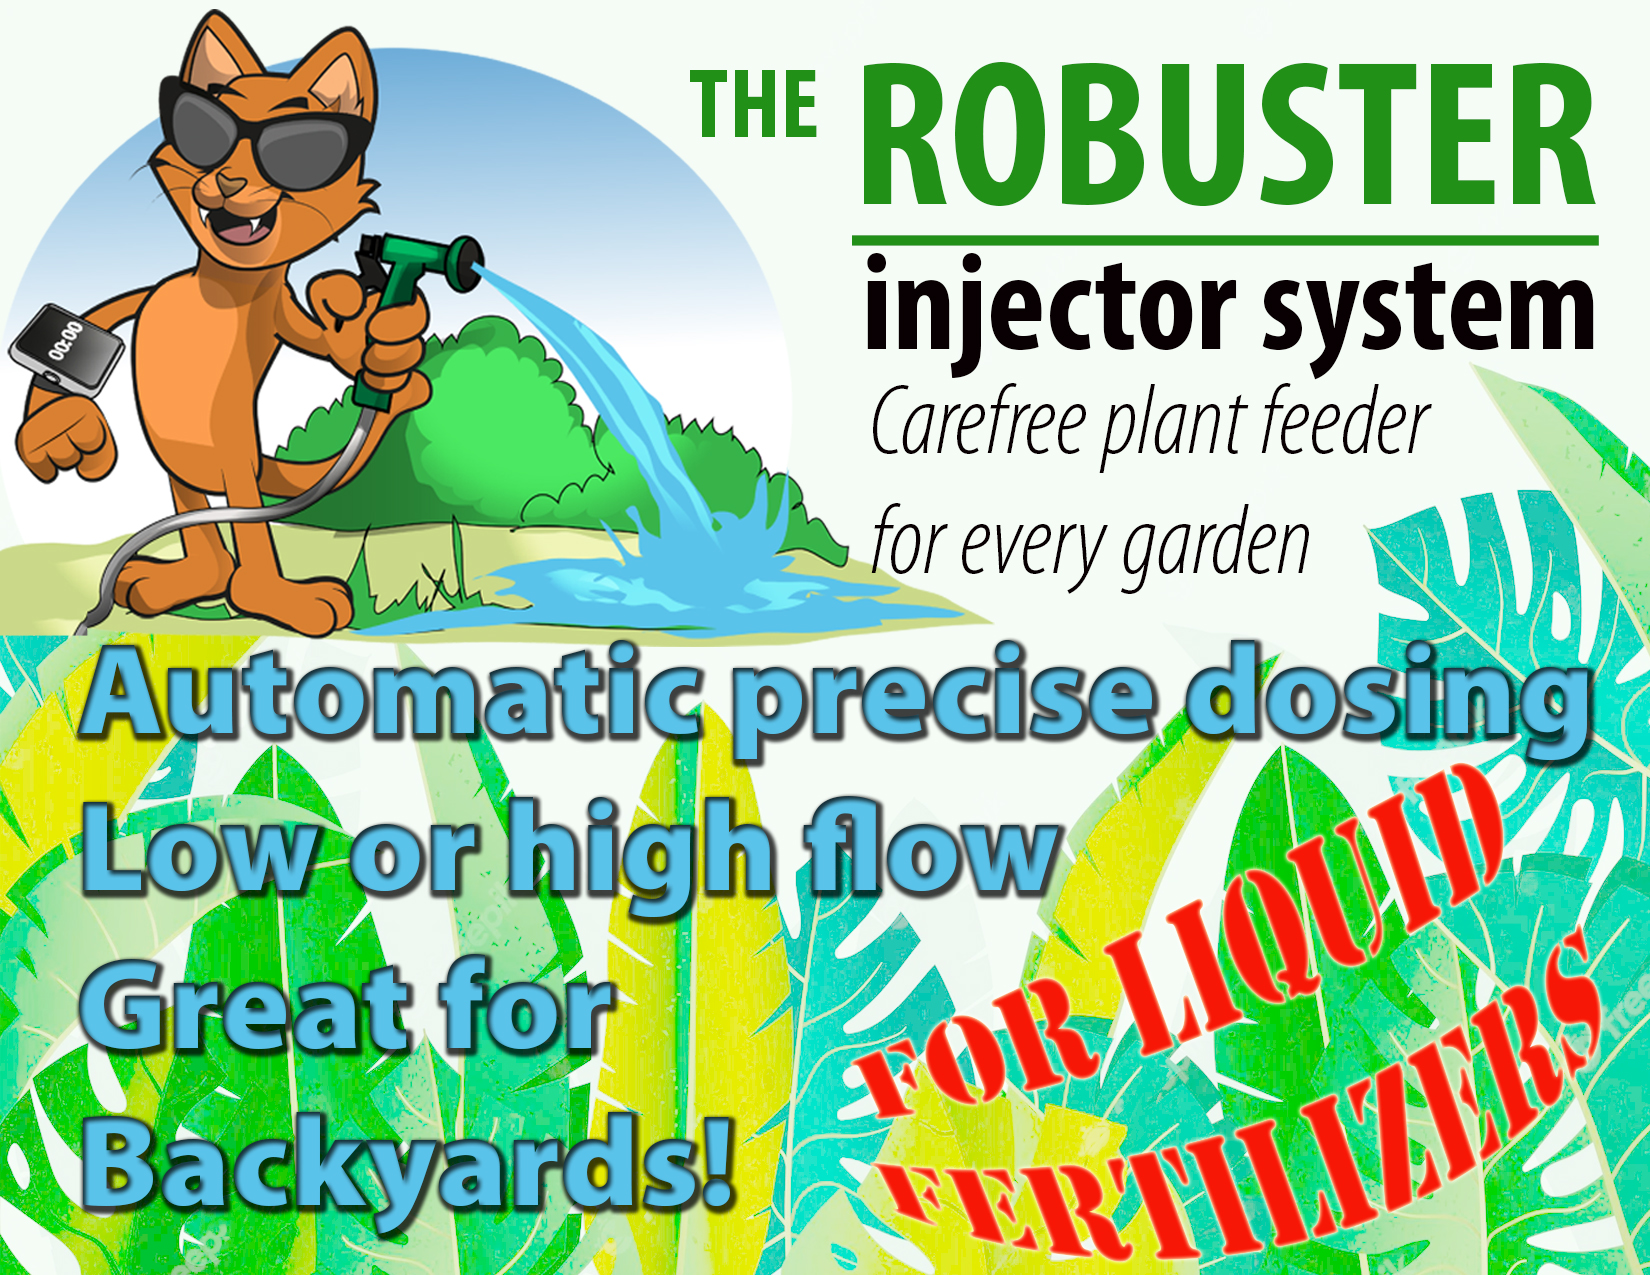 The Robuster injector system